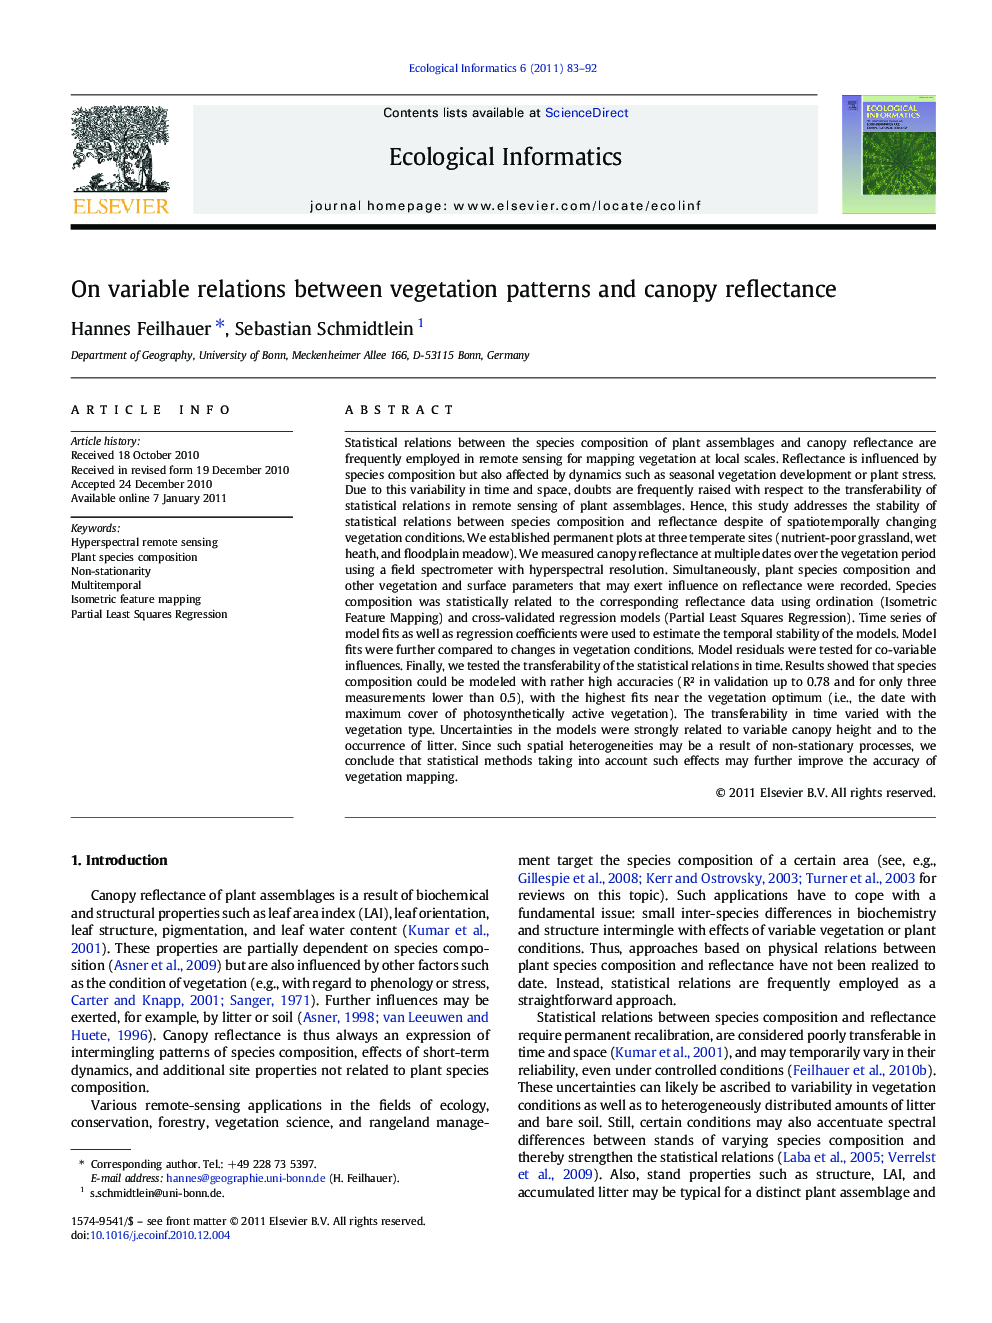 On variable relations between vegetation patterns and canopy reflectance